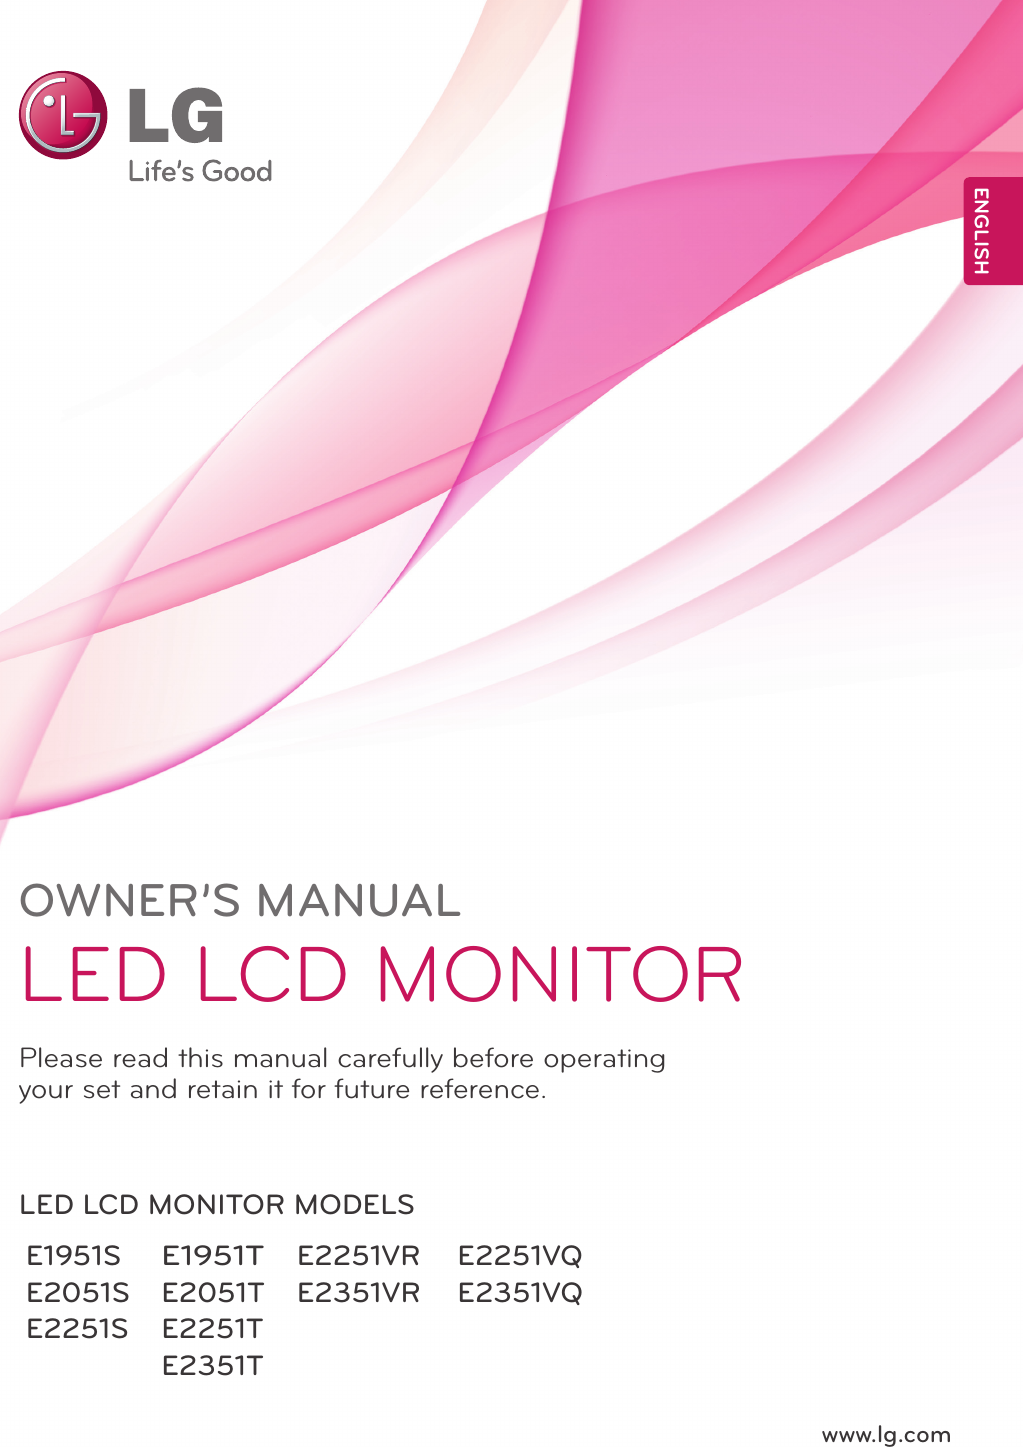 www.lg.comOWNER’S MANUALLED LCD MONITORPlease read this manual carefully before operating your set and retain it for future reference.LED LCD MONITOR MODELSENGLISHE1951TE2051T E2251T E2351TE1951S  E2051S E2251SE2251VRE2351VRE2251VQE2351VQ